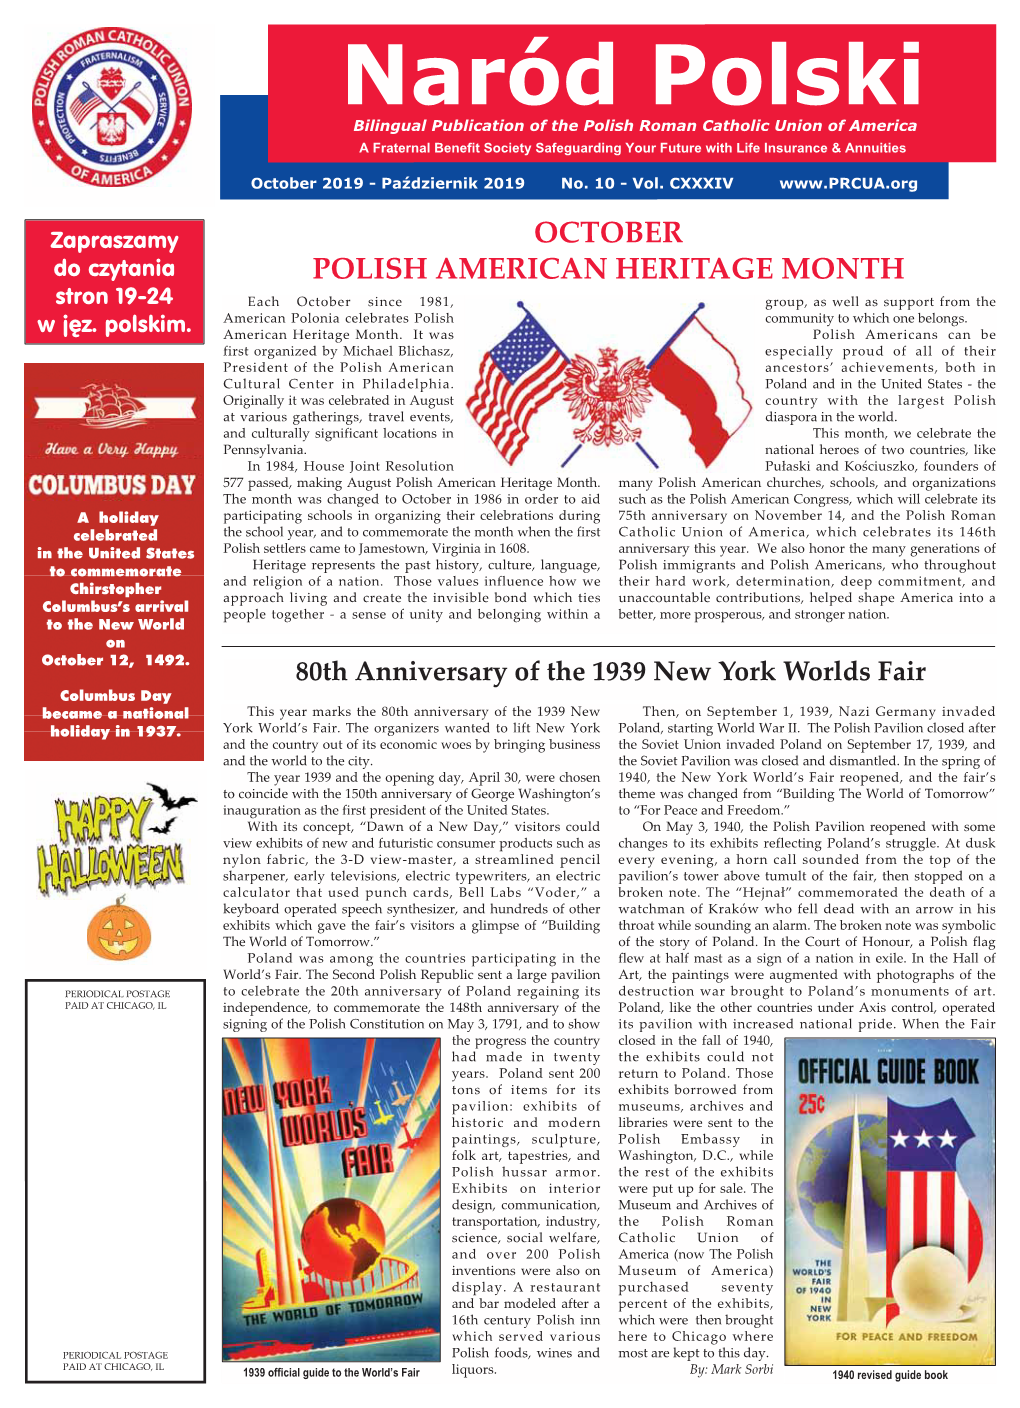 Naród Polski Bilingual Publication of the Polish Roman Catholic Union of America a Fraternal Benefit Society Safeguarding Your Future with Life Insurance & Annuities